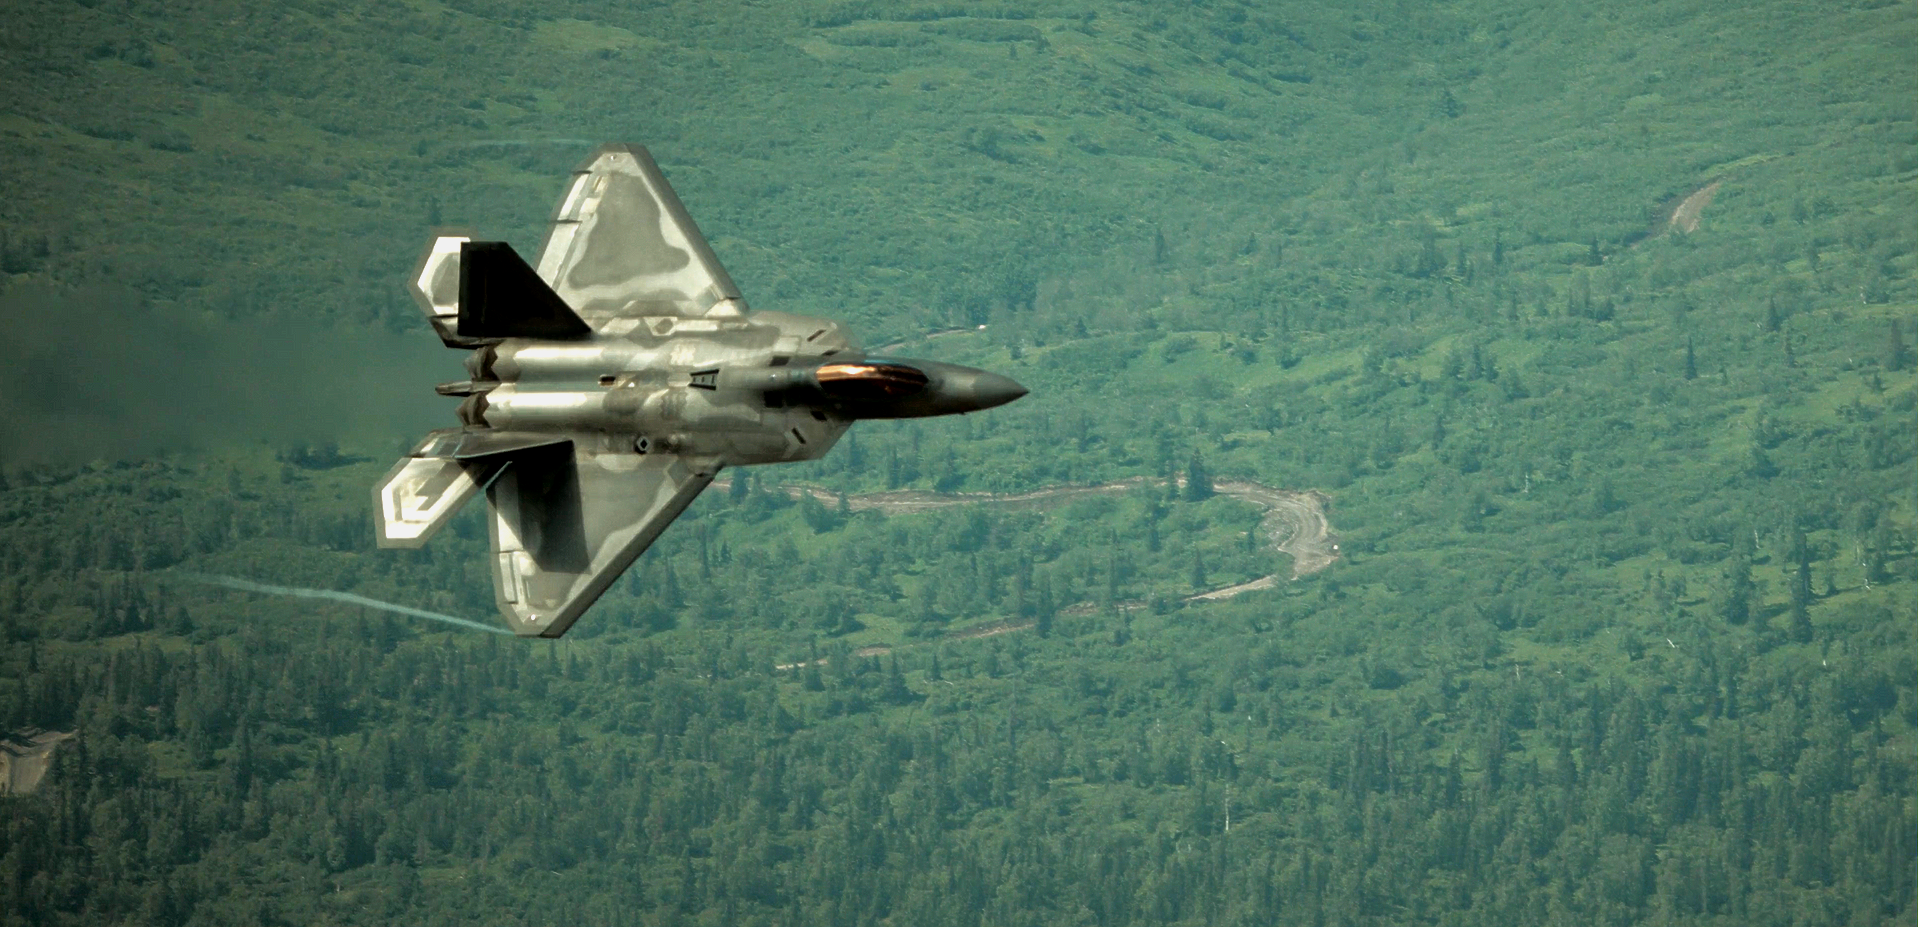 A fighter jet is flying over a forest.